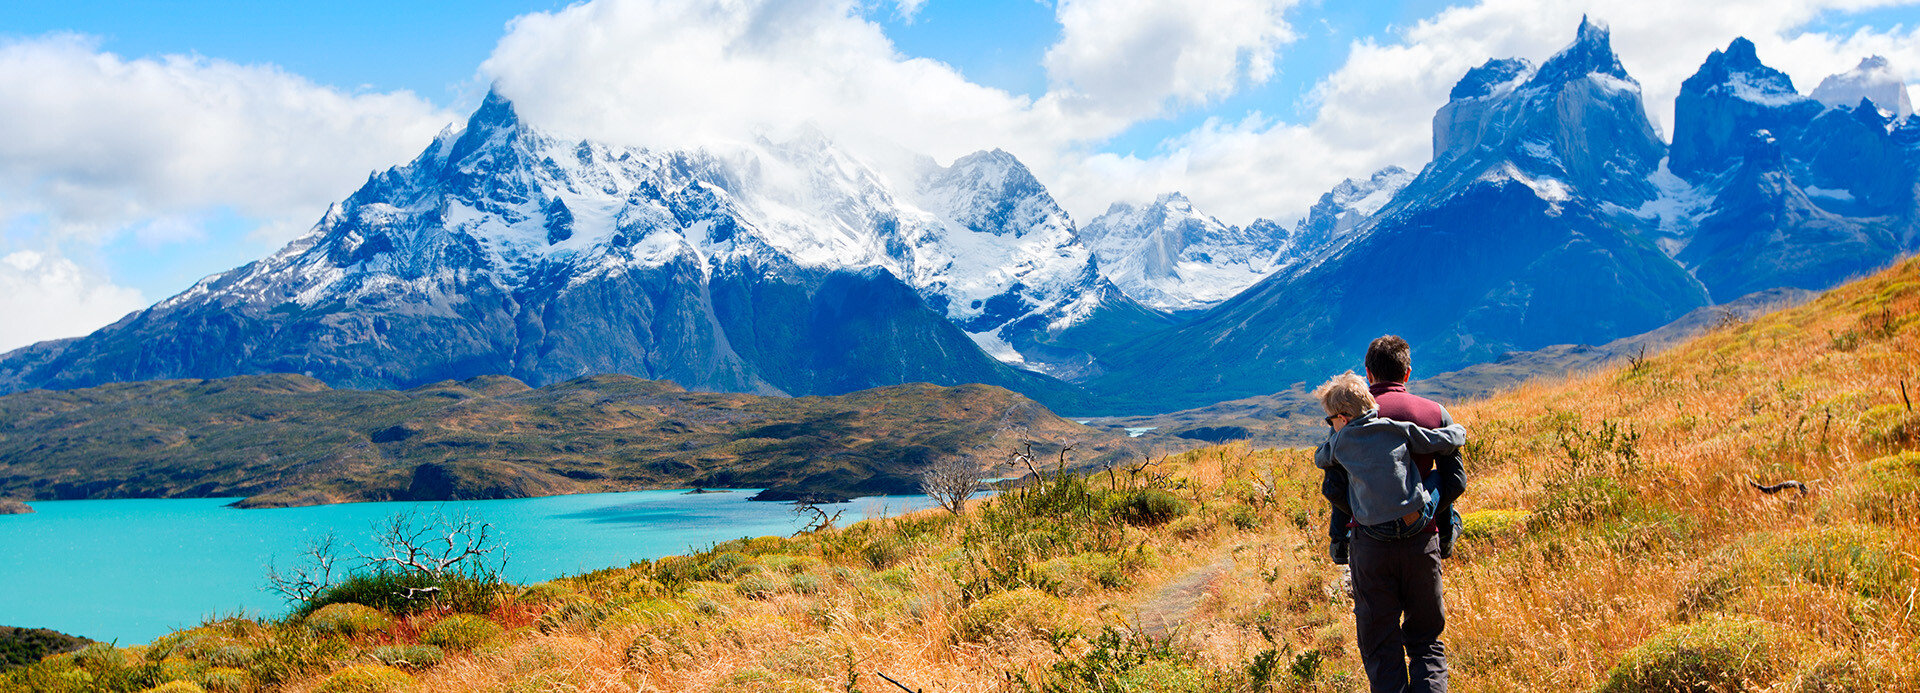 Multigenerational Trips to Torres del Paine National Park